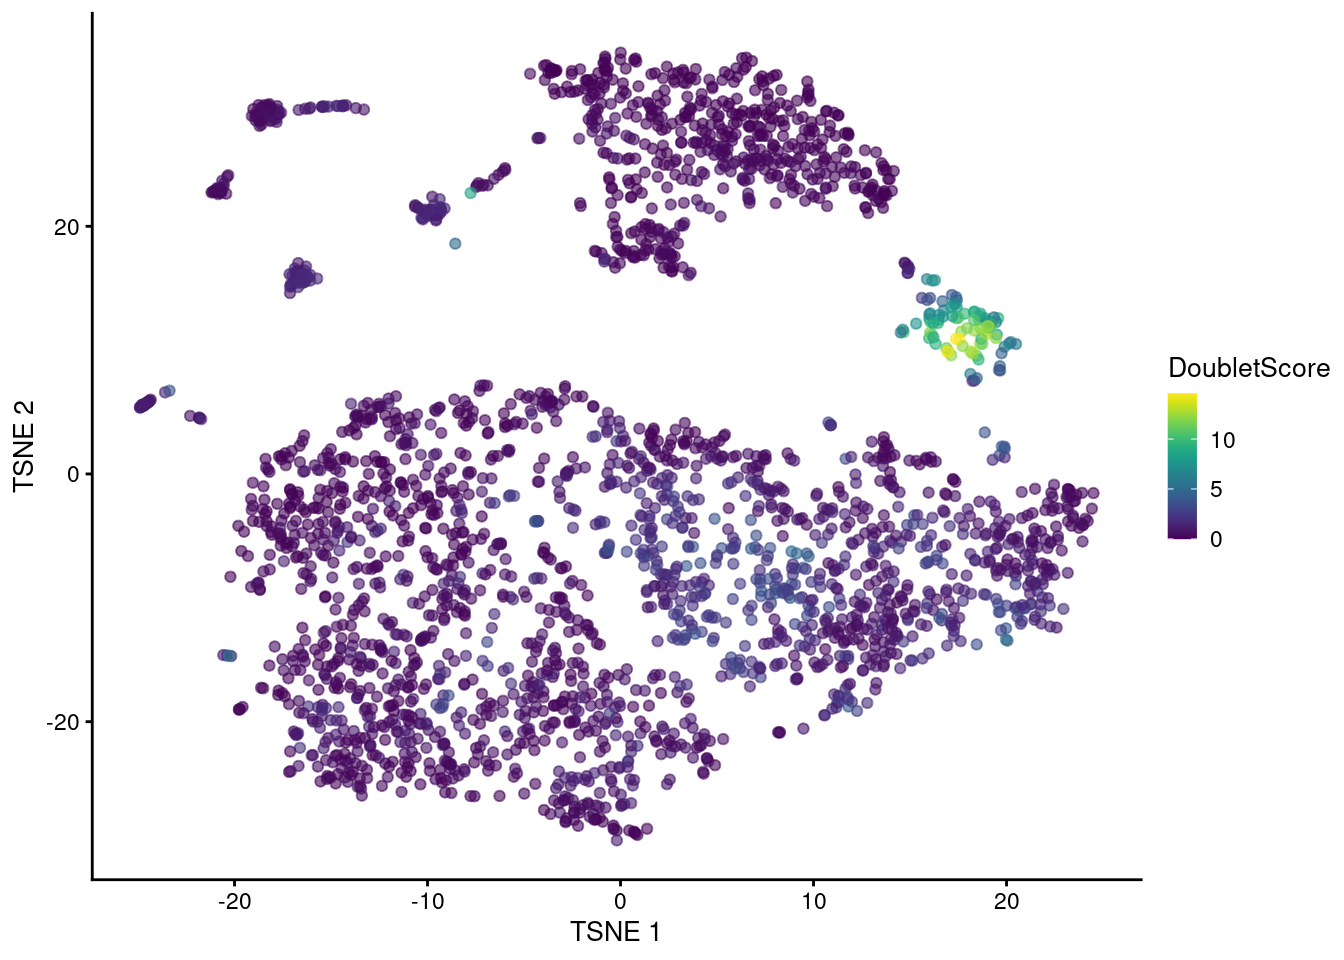 t-SNE plot of the mammary gland data set. Each point is a cell coloured according to its doublet density.